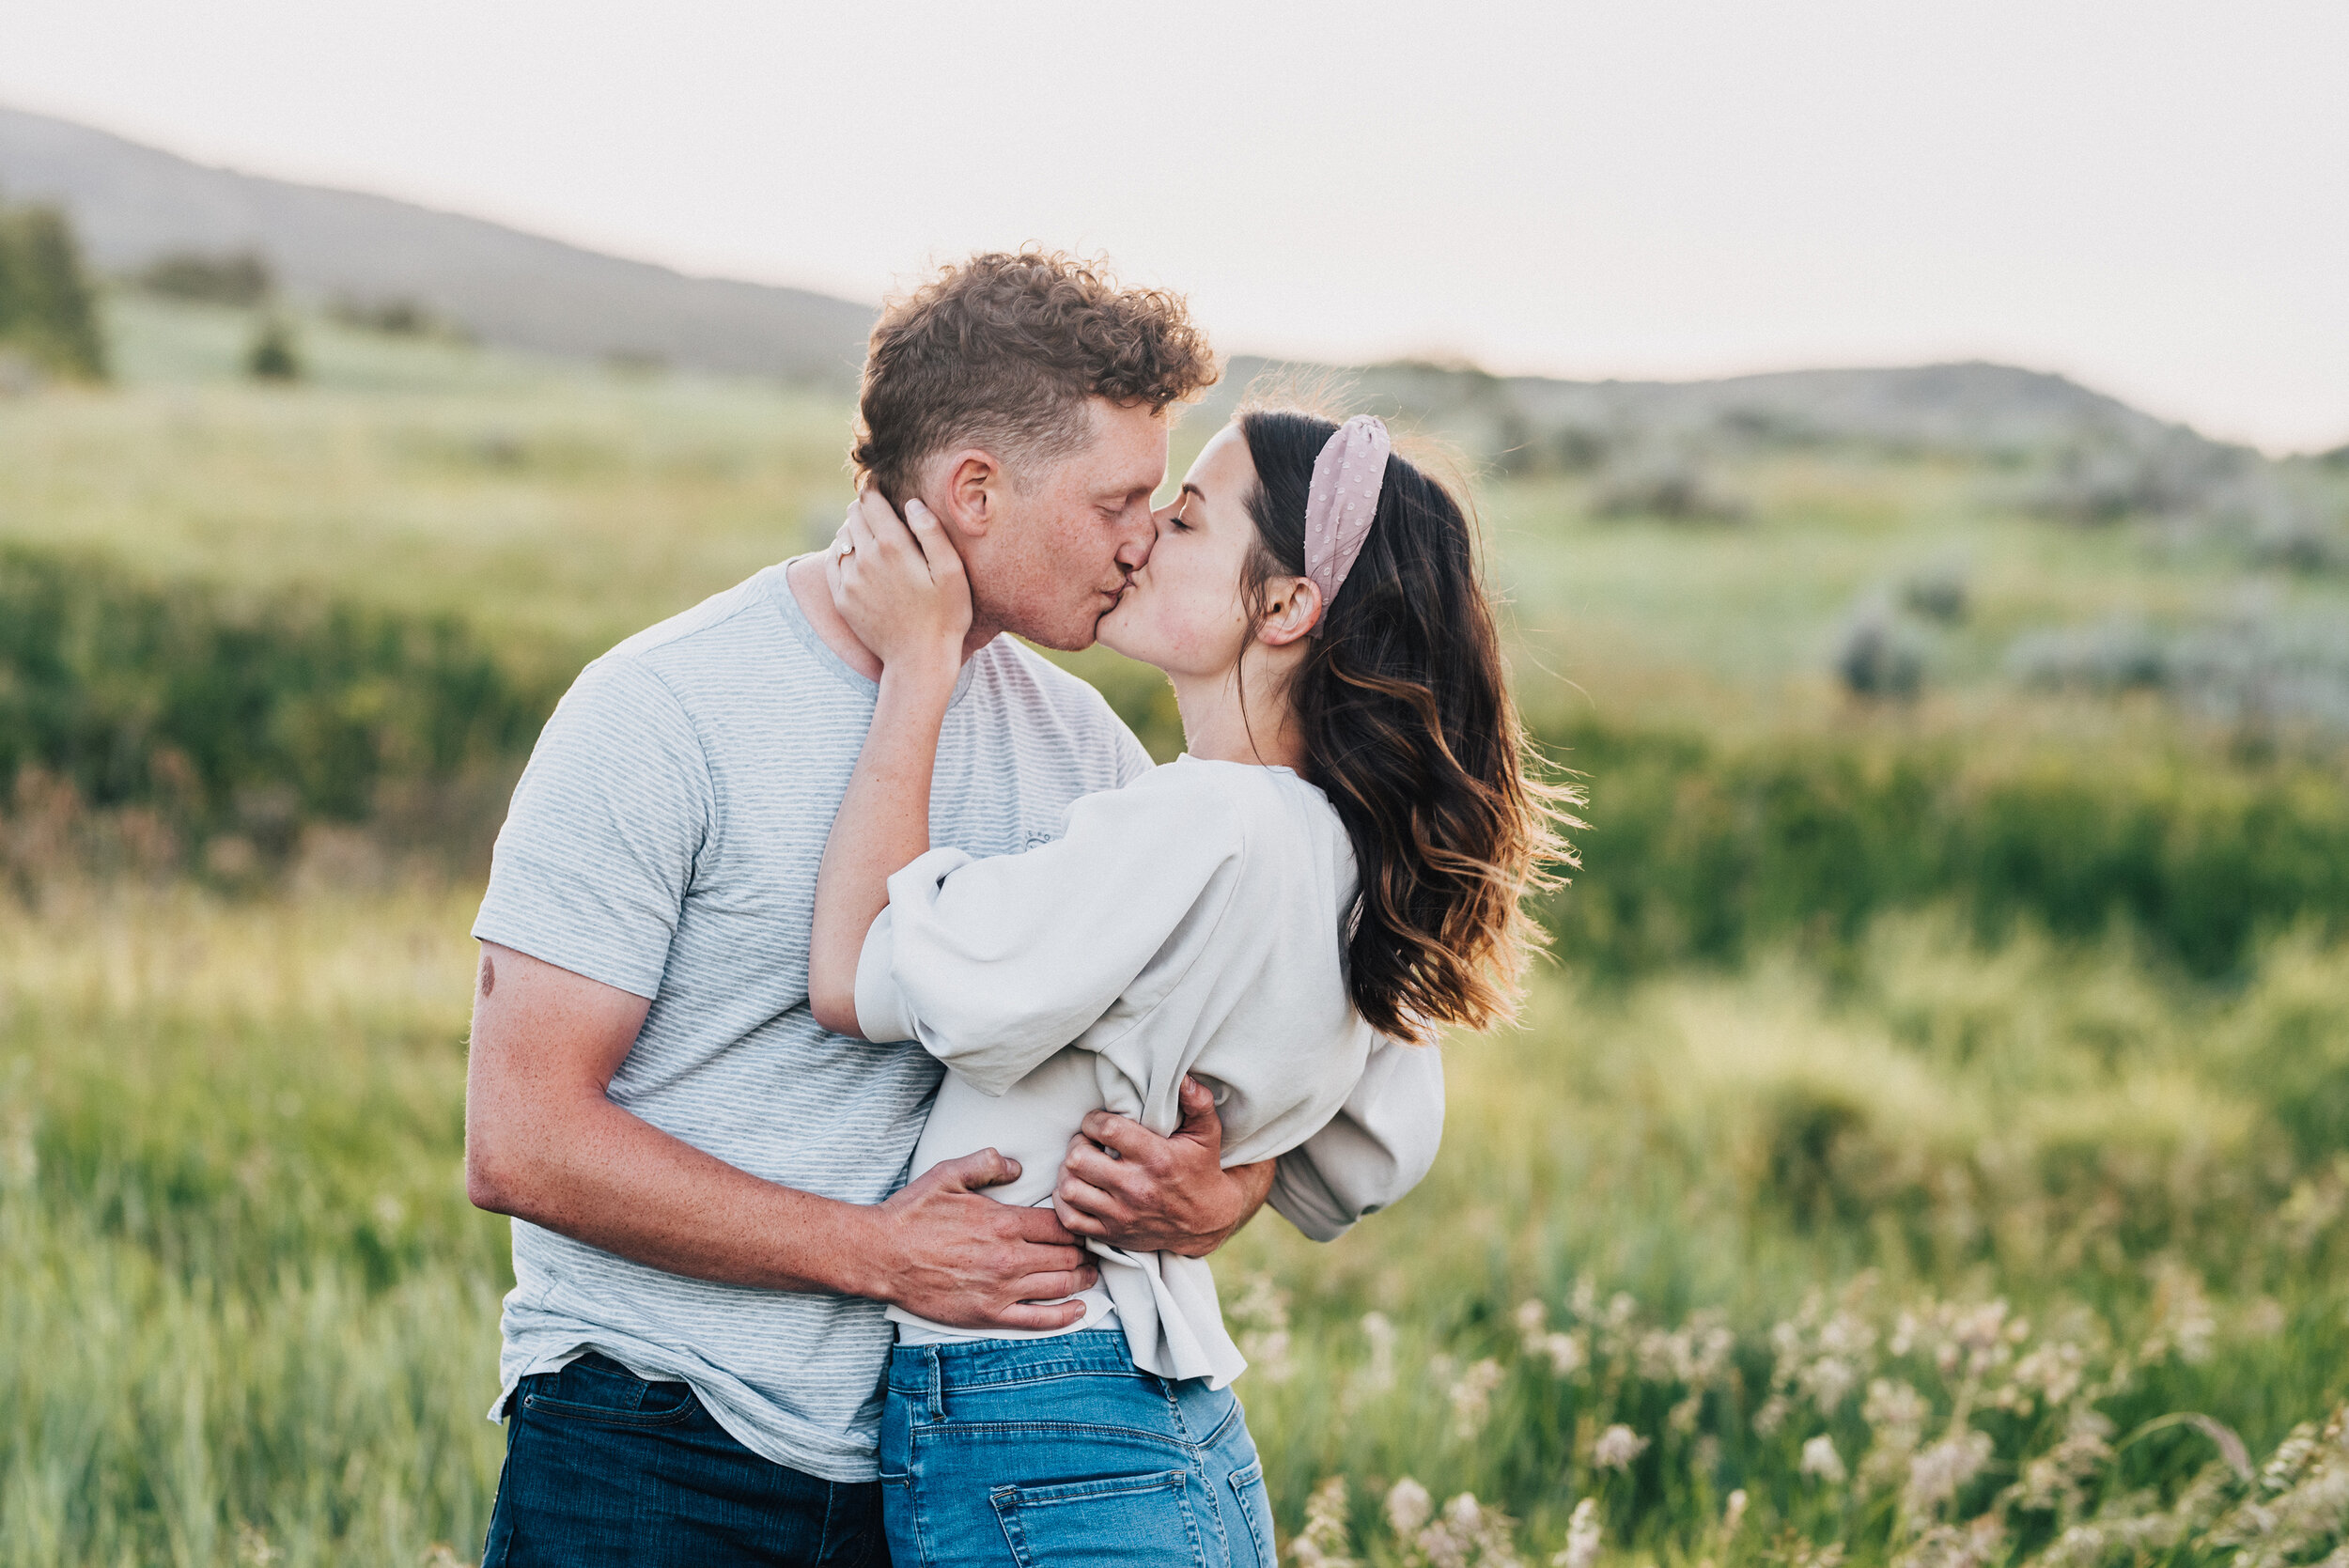 Kissing pose of the most adorable engaged couple by professional engagement photographer Kristi Alyse taken in Logan, Utah. Cache valley wedding photographer trendy outfits for engagements inspiration for couples session posing ideas outfit ideas pink headband kissing pose utah brides #engagements #couplespose #posingideas #weddingphotog #utahbride #professionalengagements #engagementinspo #couplesphotography #utahcouples #wellsville #mountainengagements